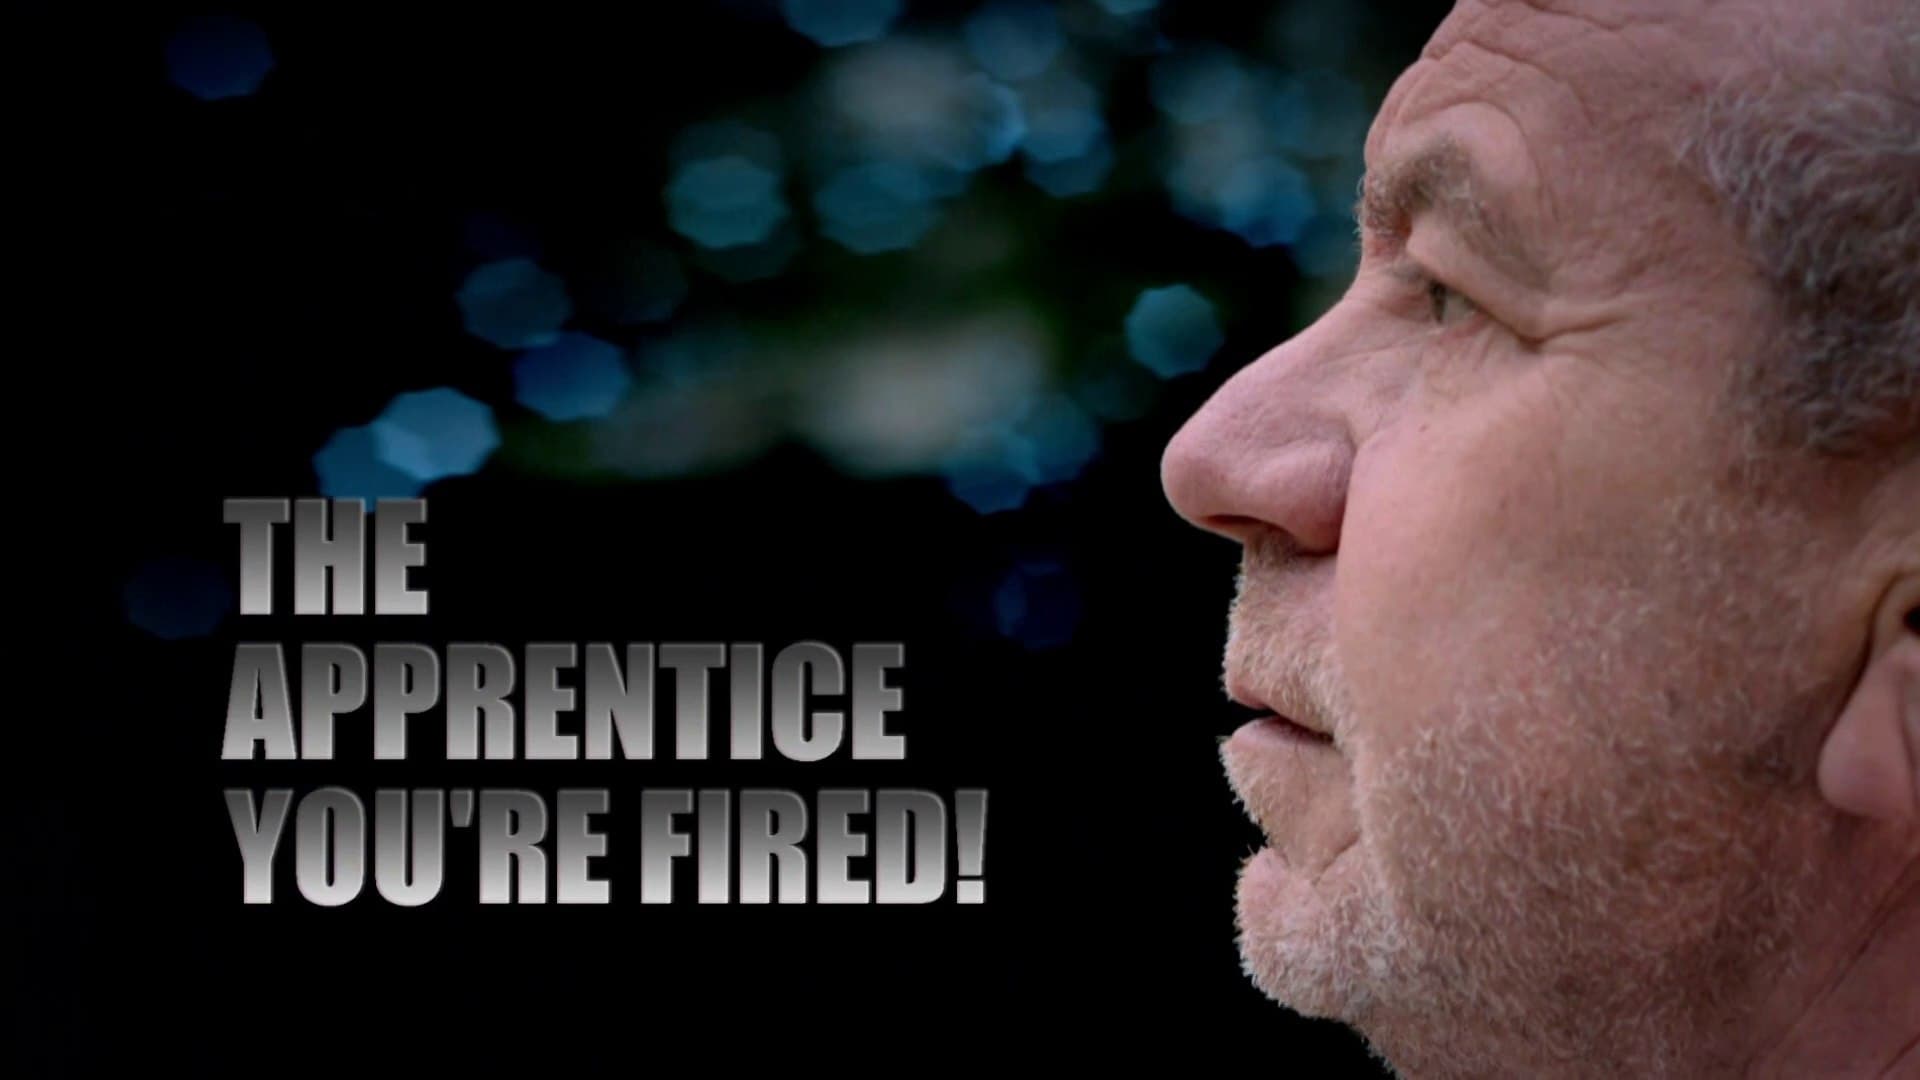 The Apprentice: You're Fired! - Season 2